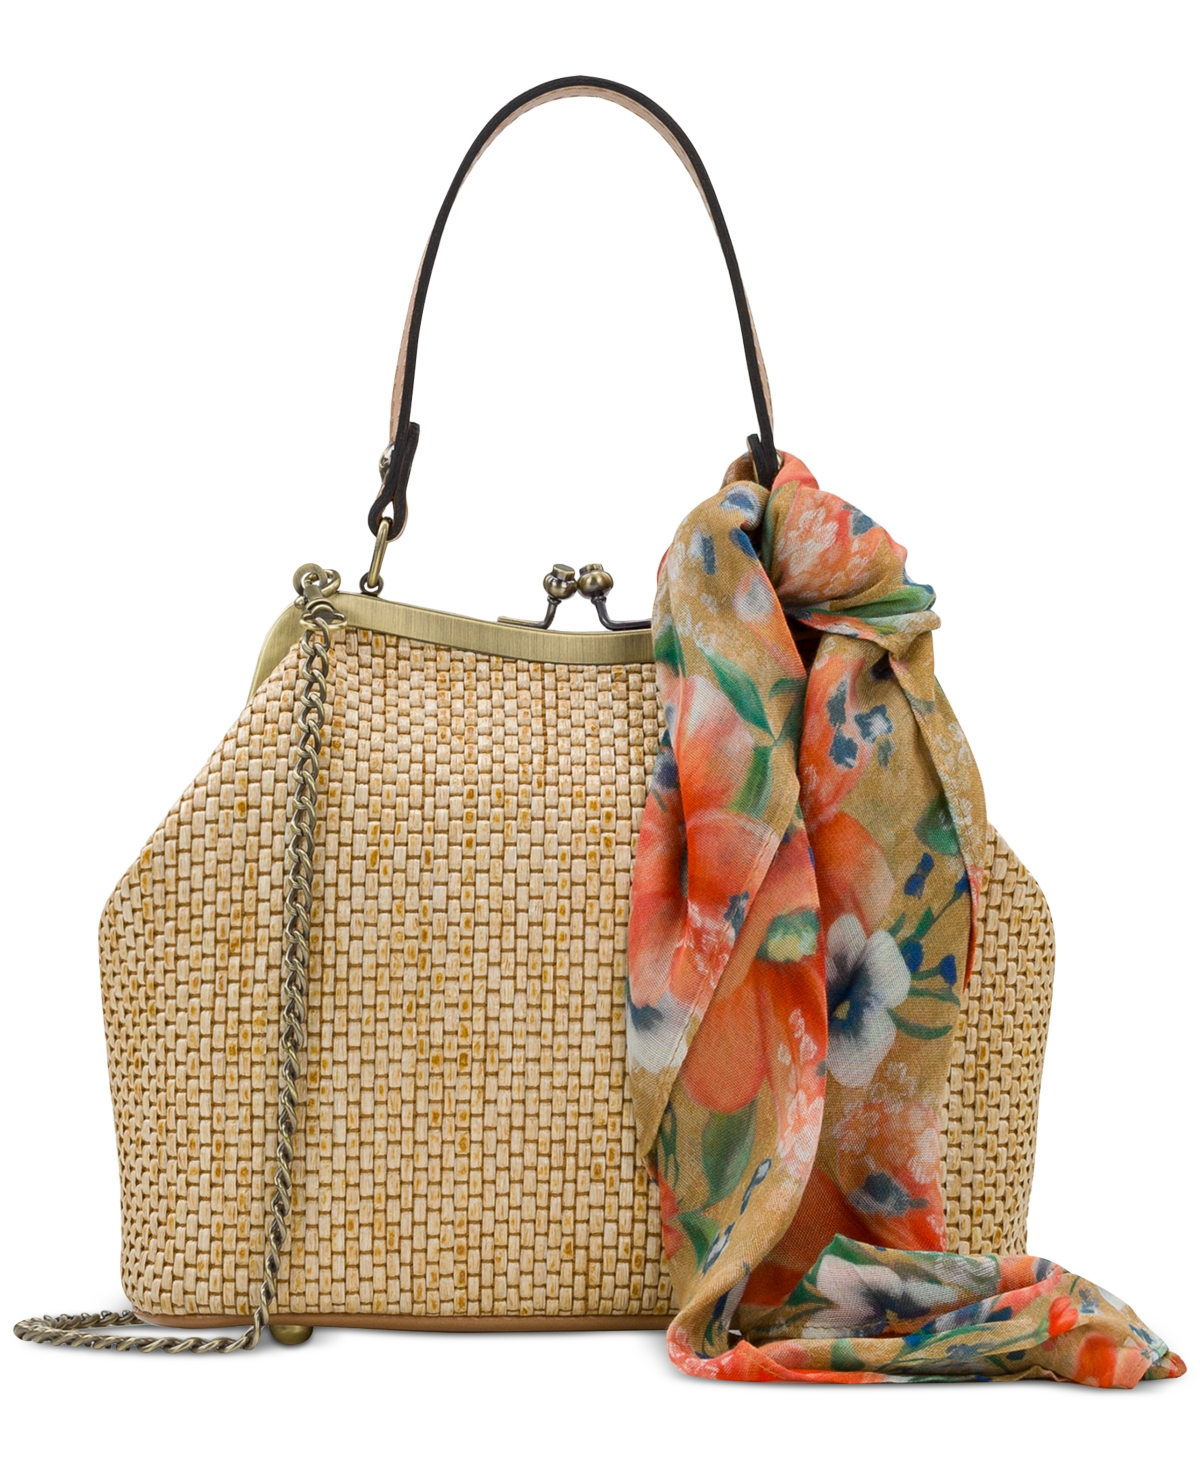 Laureana Small Frame Bag with Apricot Blossoms Scarf - Naturale